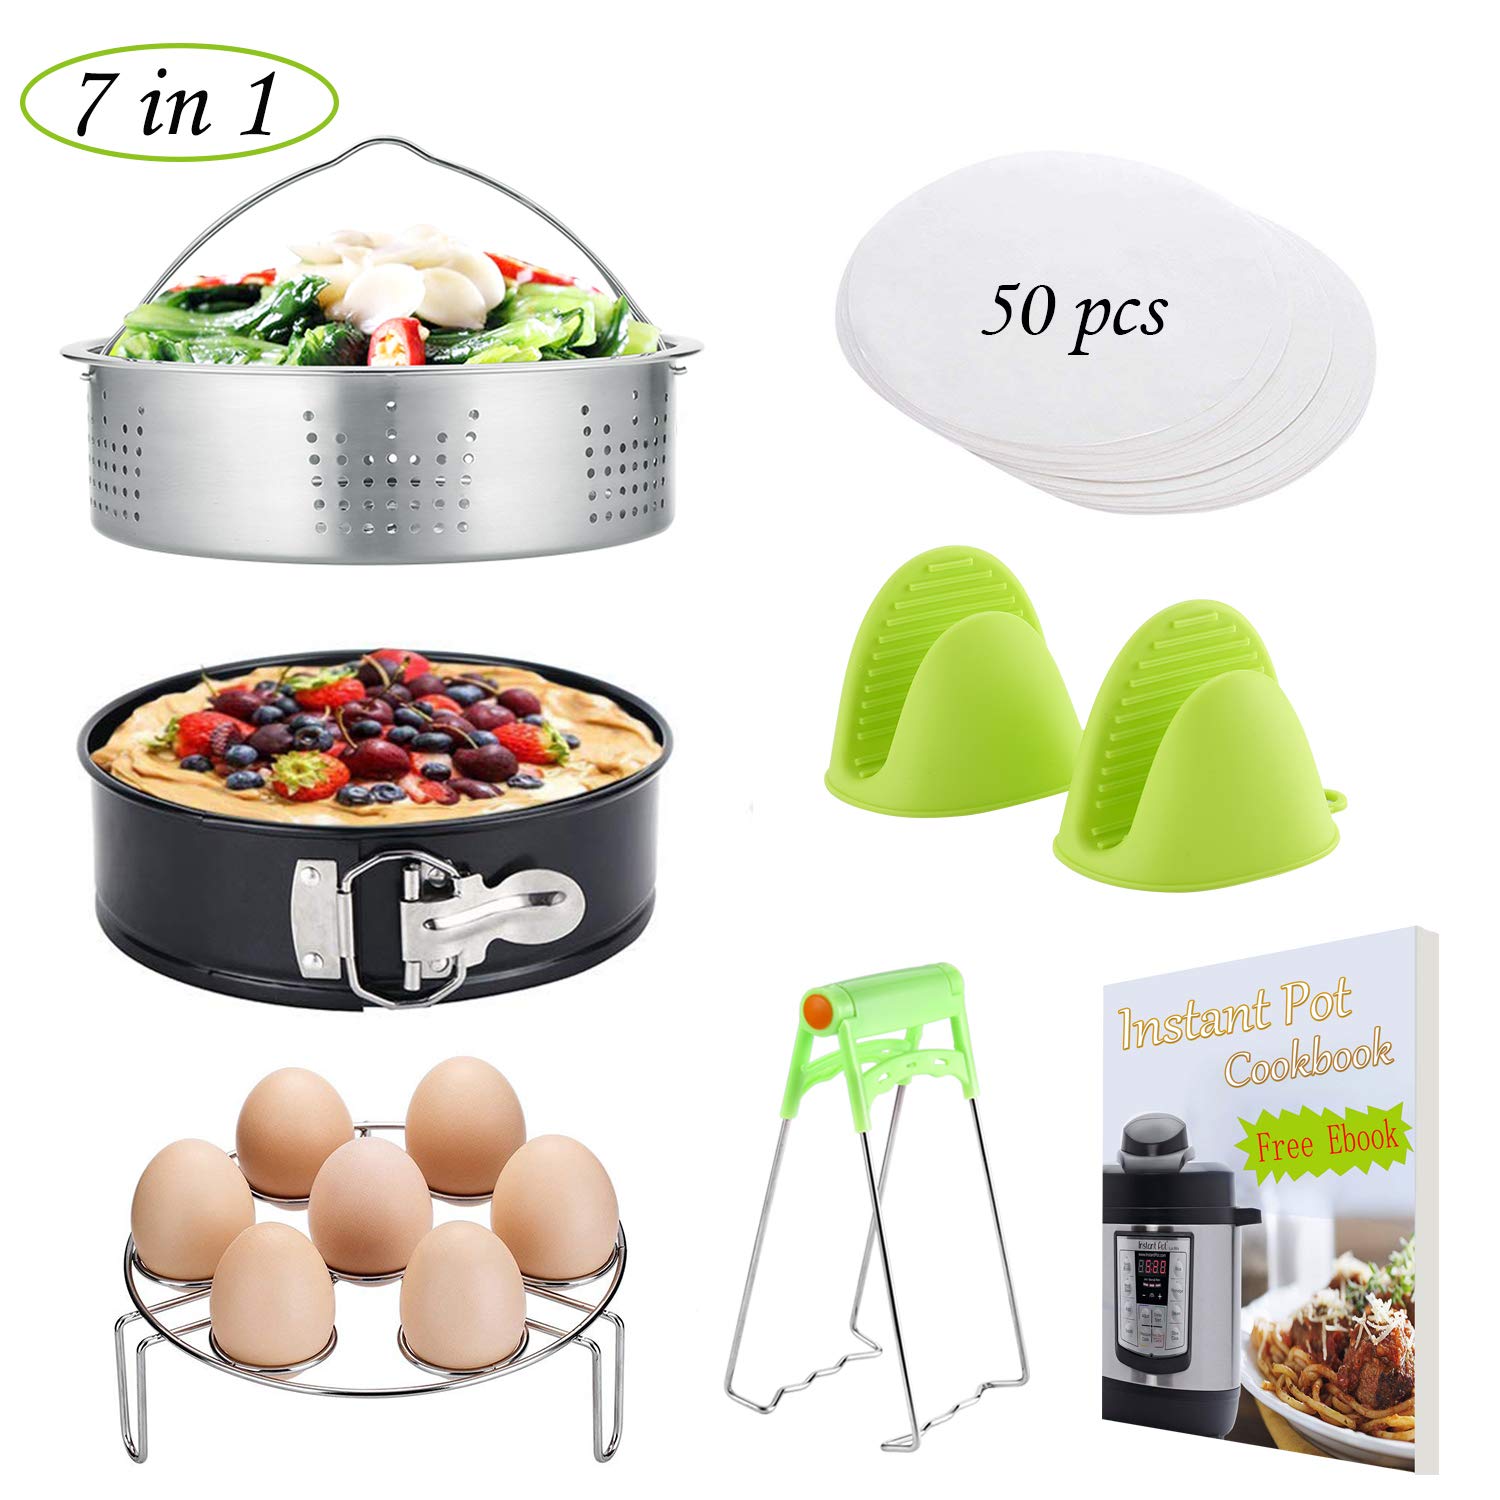 Instant Pot Accessories Instapot Accessory Fits Instant Pot 5,6,8 Qt, with Steamer basket, None-stick Springform Pan, Egg Bites Mold, Egg Steamer Rack(with Handles), Dish Clip, Kitchen Tongs(AP-01)